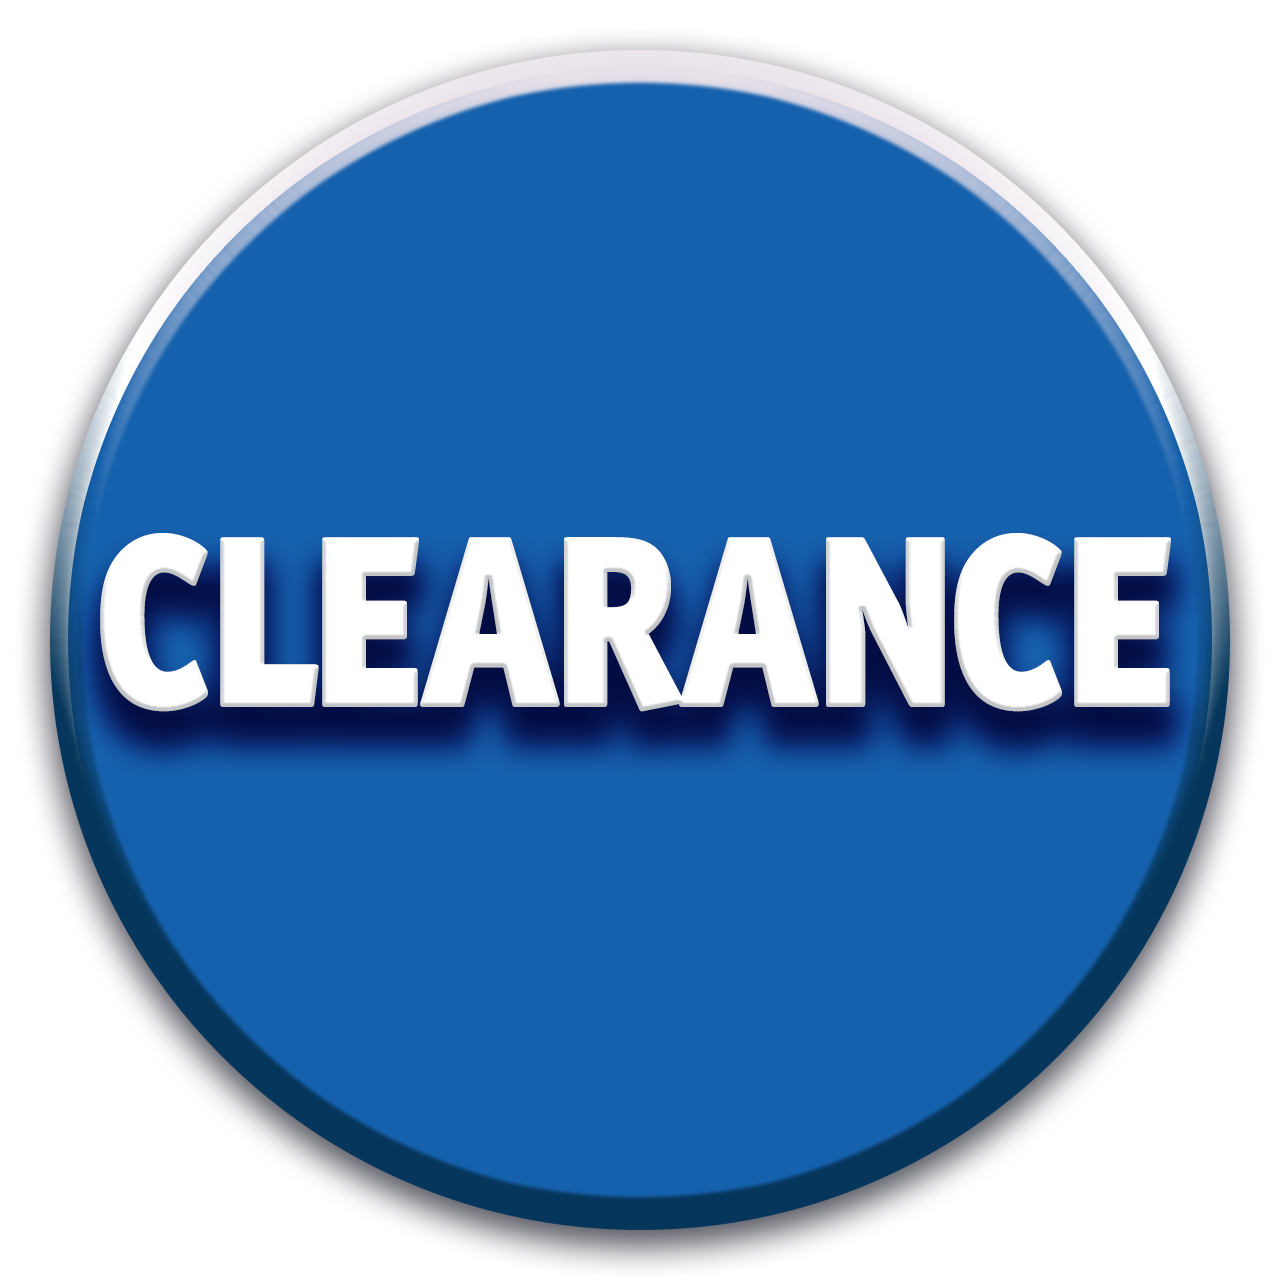 Shop Clearance Products at DQE